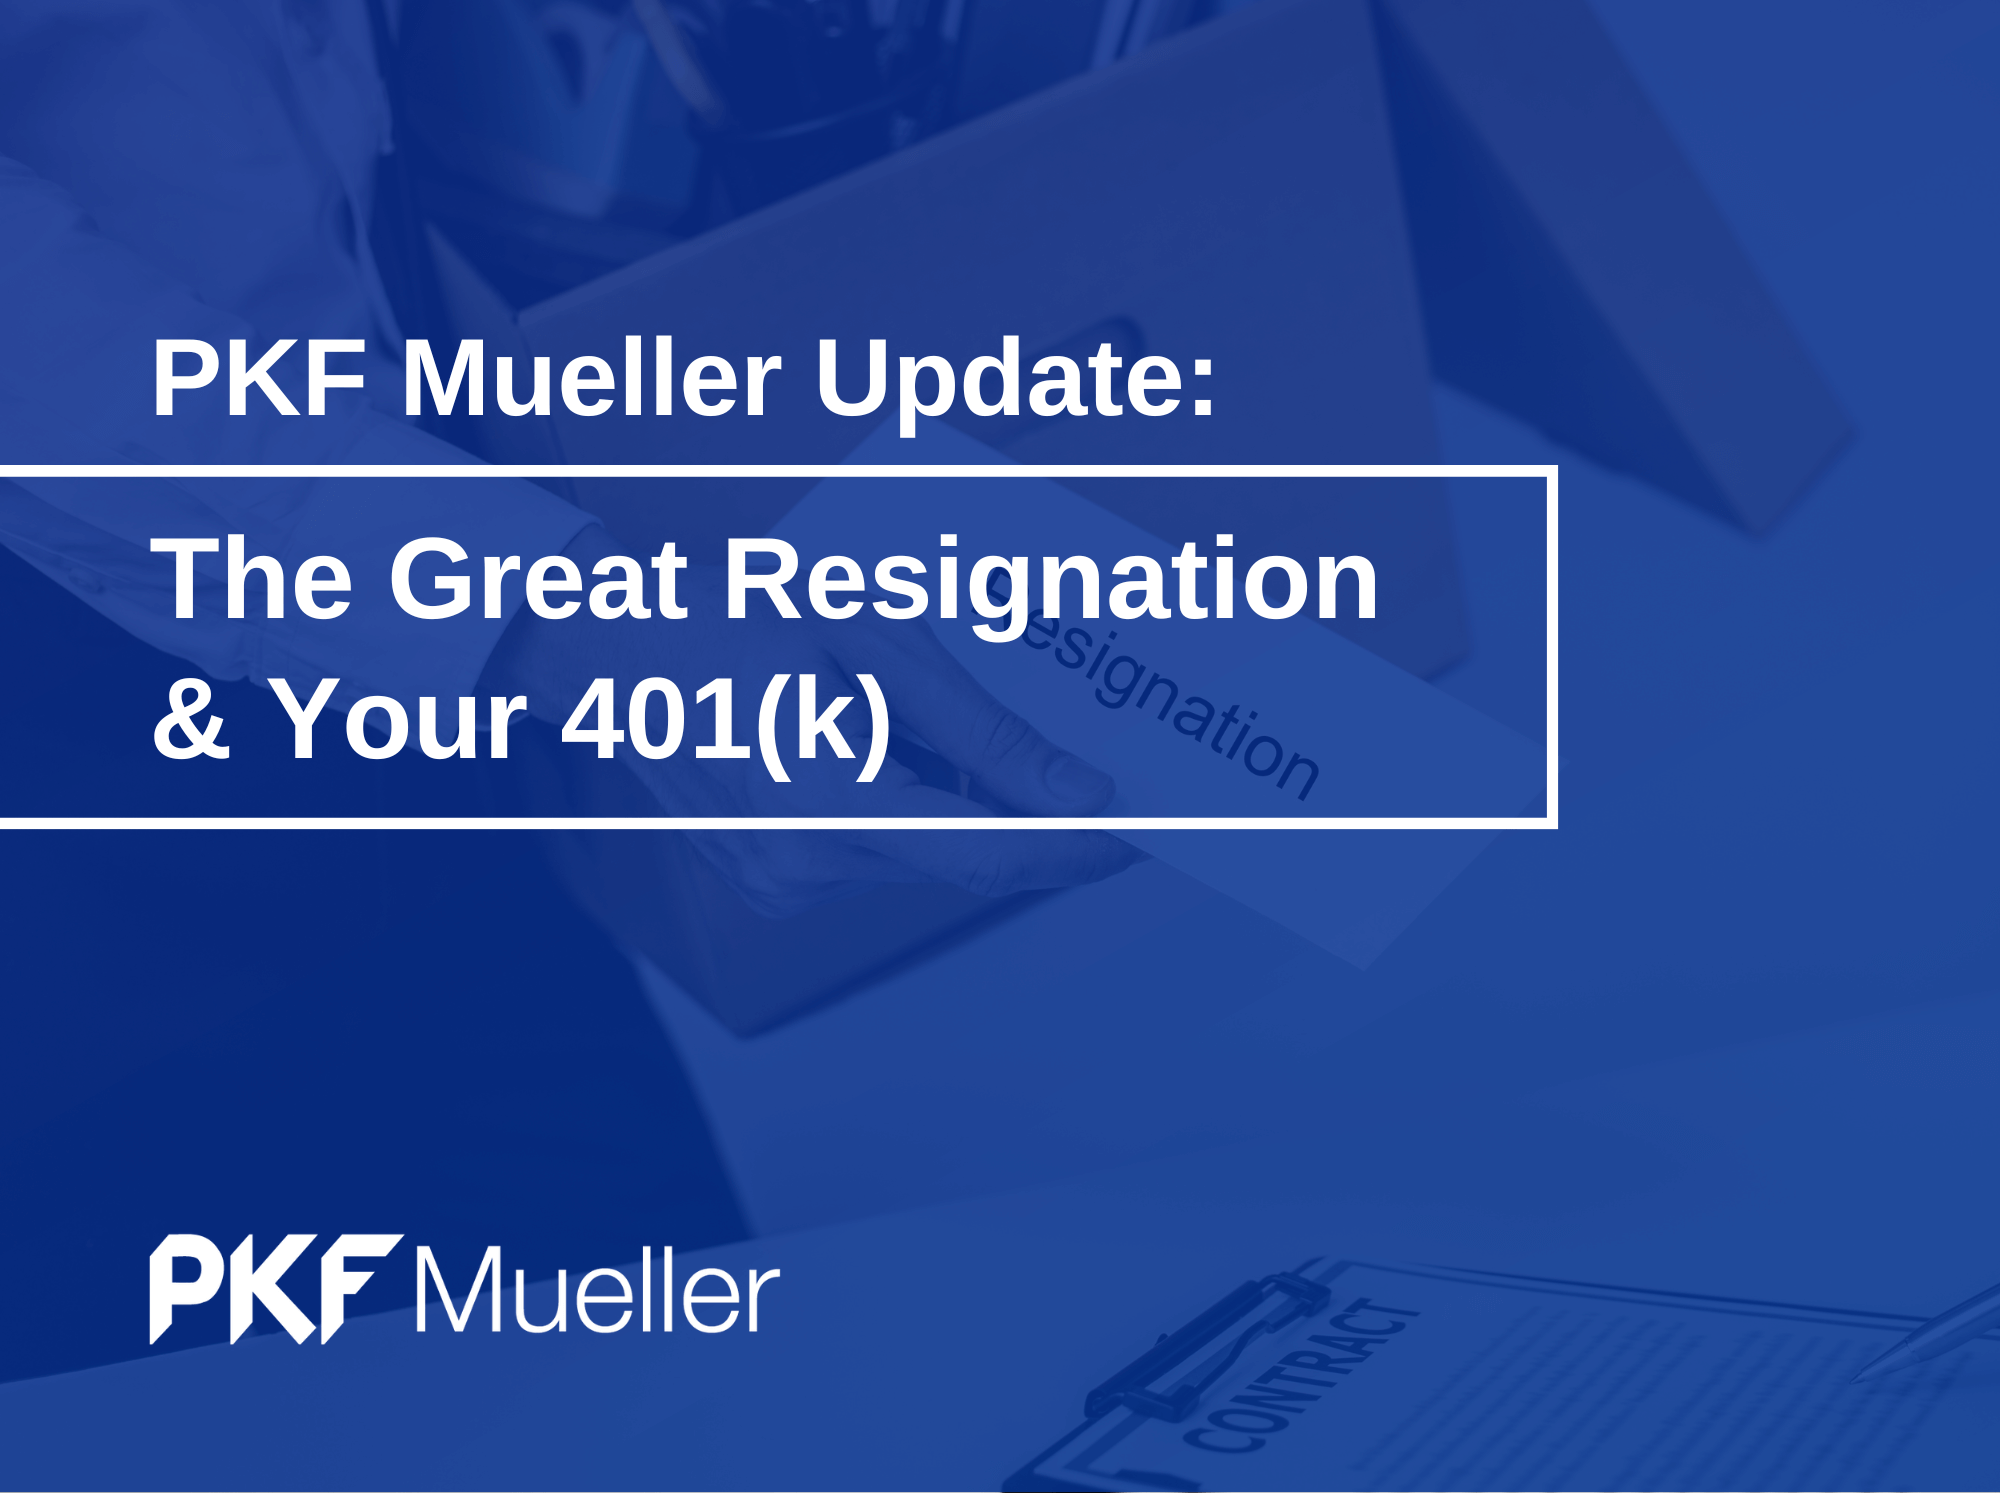 The Great Resignation and Your 401(k)